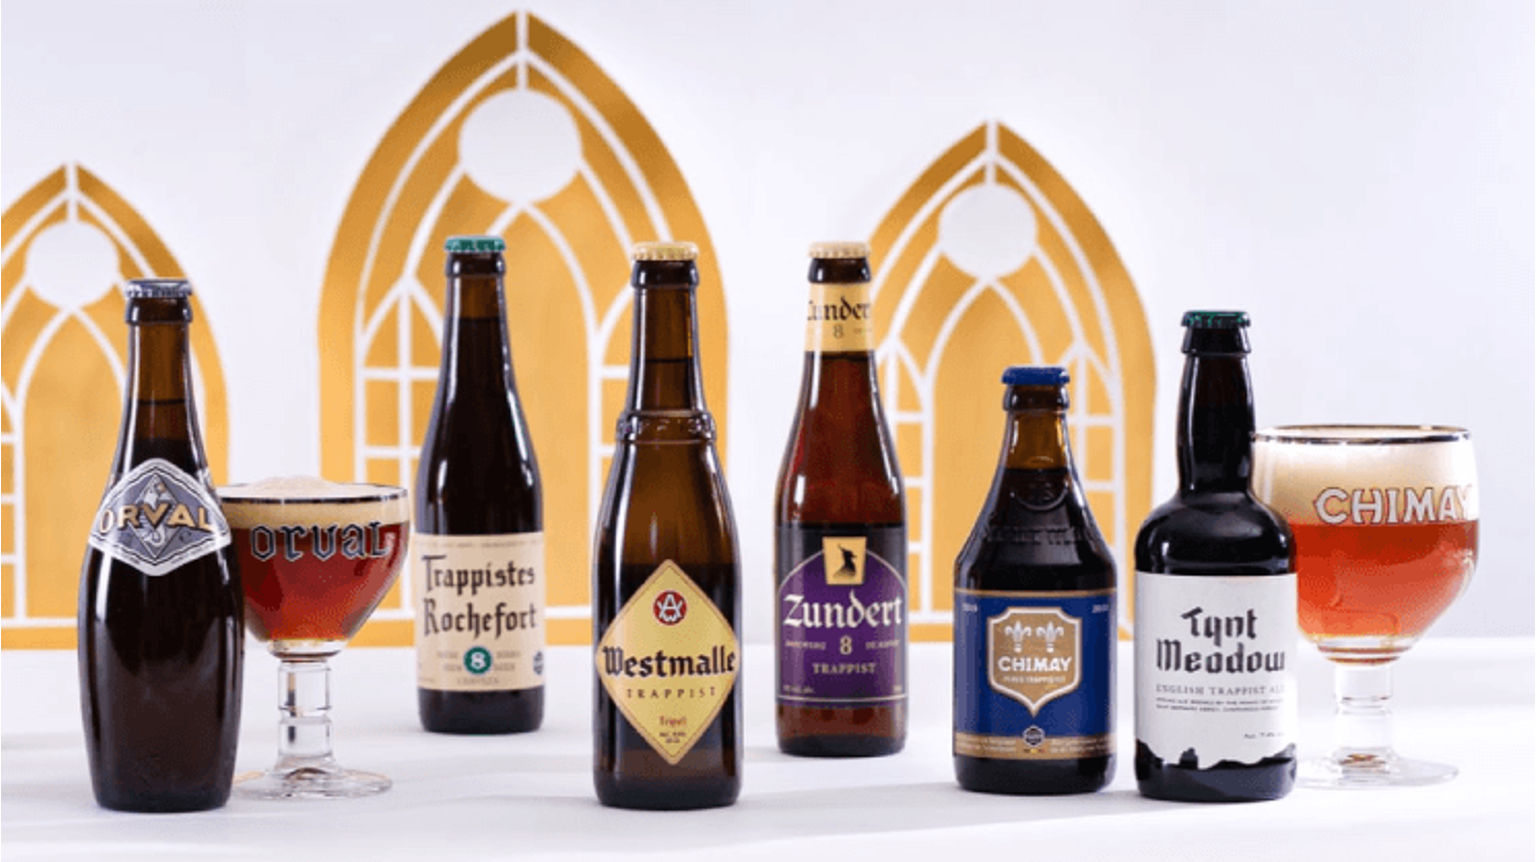 thumbnail for blog article named: Trappist Beers: A religious experience in Craft Beer